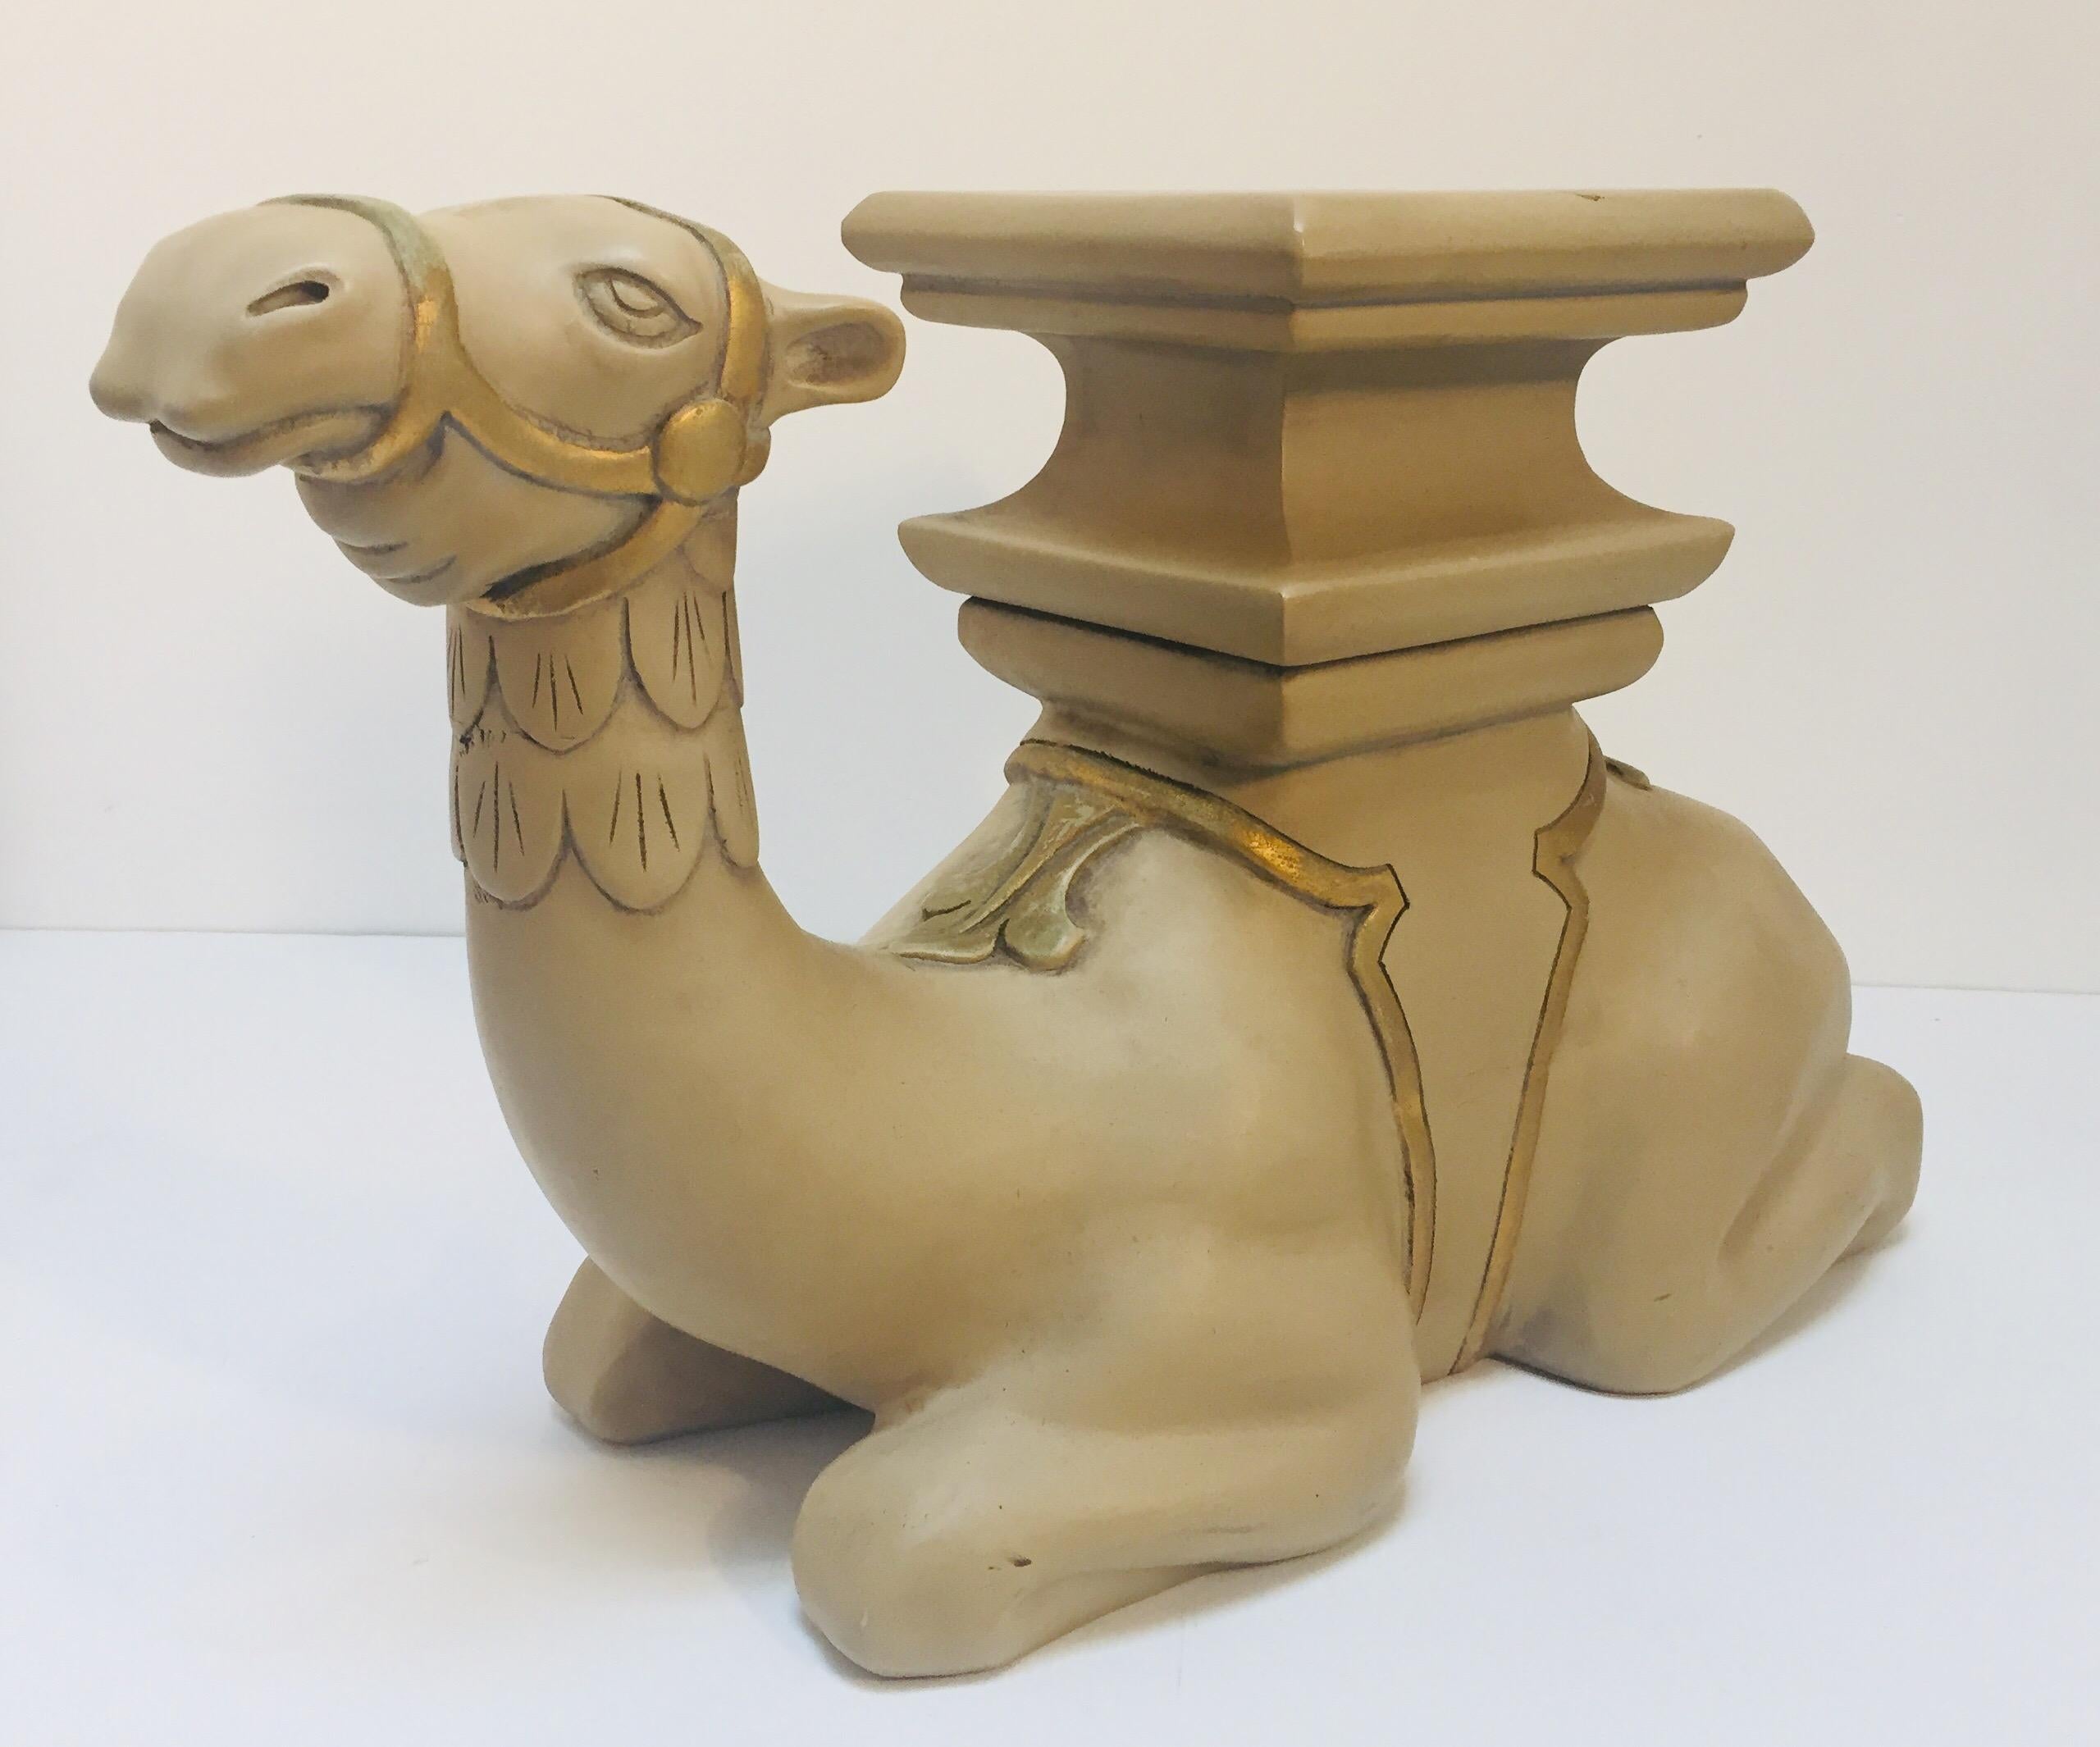 Hollywood Regency Pair of Camel Sculptures Stools or Side Tables